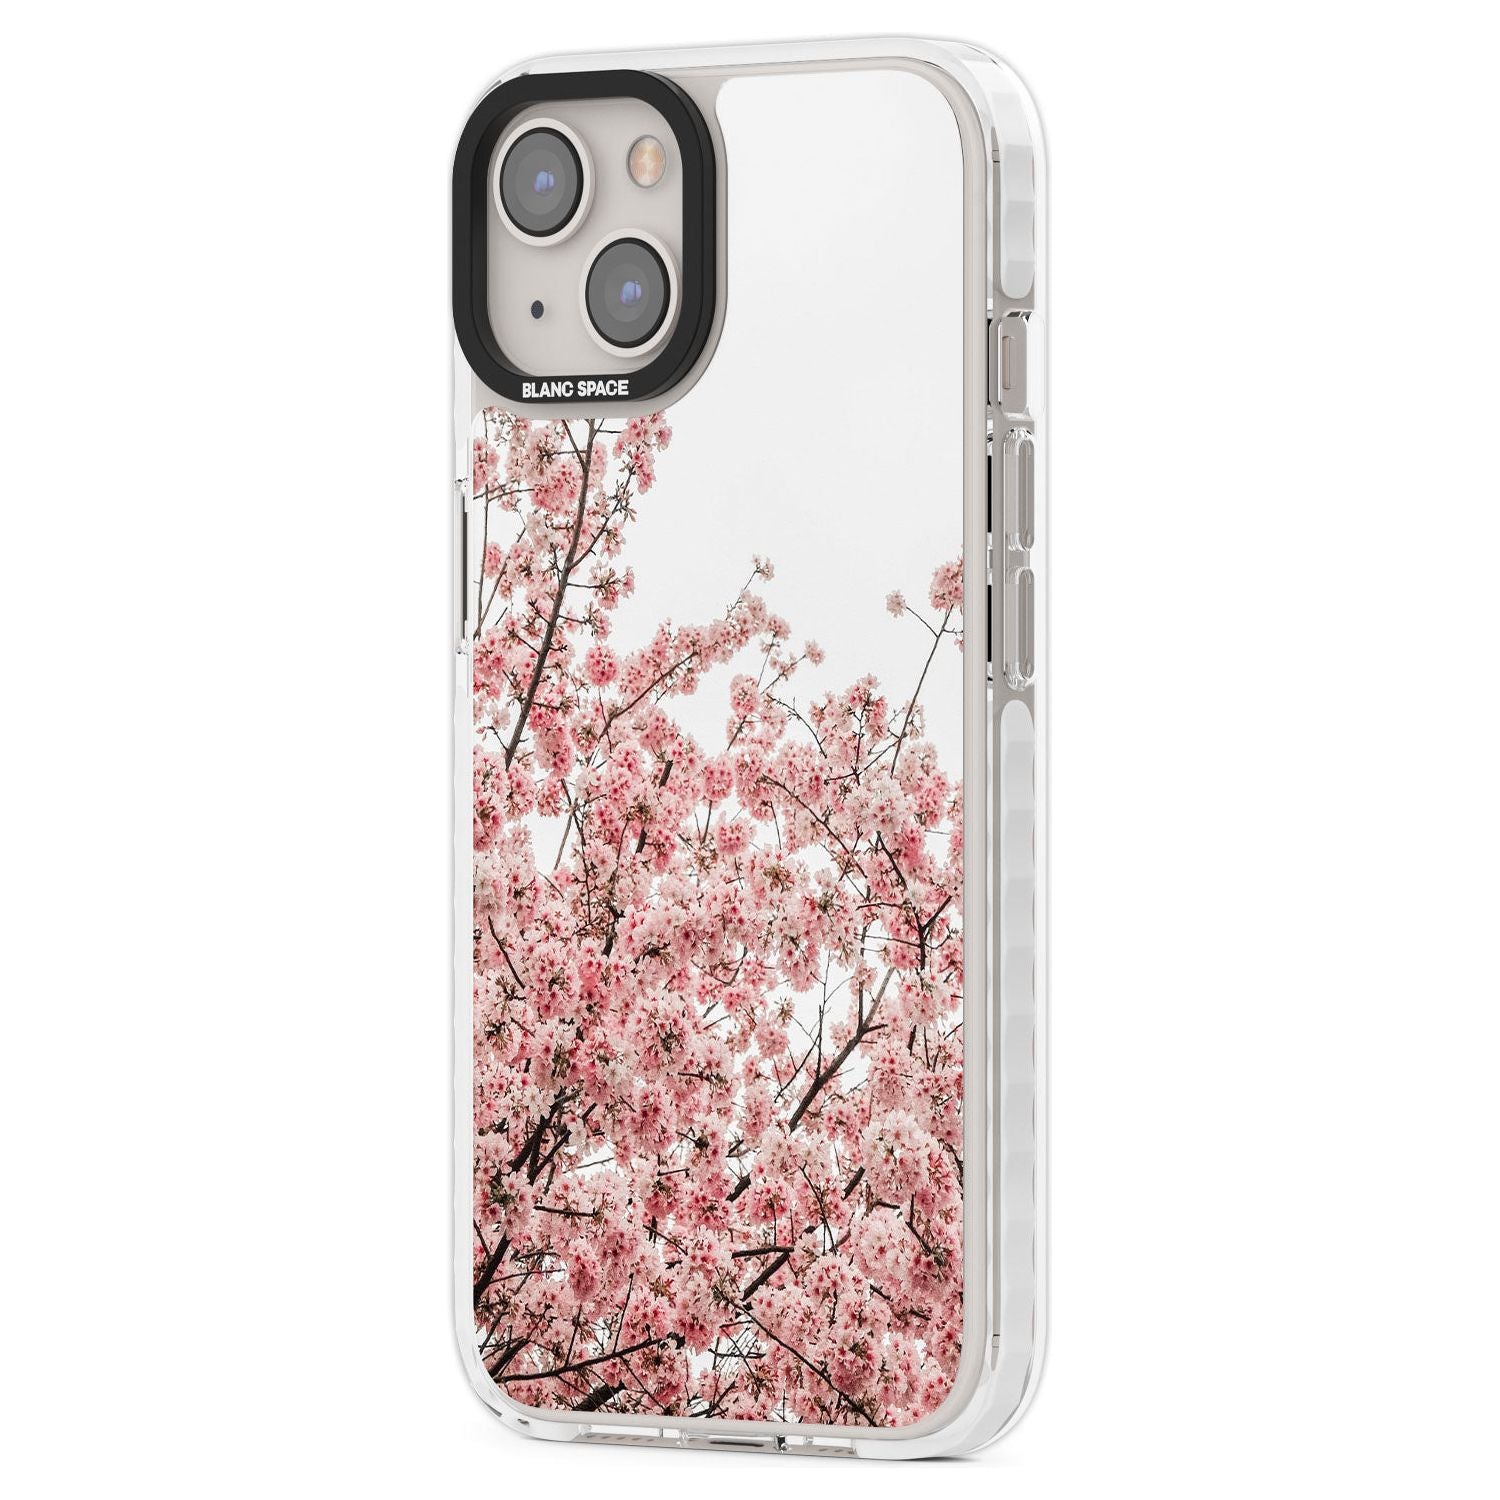 Cherry Blossoms - Real Floral Photographs Phone Case iPhone 15 Pro Max / Black Impact Case,iPhone 15 Plus / Black Impact Case,iPhone 15 Pro / Black Impact Case,iPhone 15 / Black Impact Case,iPhone 15 Pro Max / Impact Case,iPhone 15 Plus / Impact Case,iPhone 15 Pro / Impact Case,iPhone 15 / Impact Case,iPhone 15 Pro Max / Magsafe Black Impact Case,iPhone 15 Plus / Magsafe Black Impact Case,iPhone 15 Pro / Magsafe Black Impact Case,iPhone 15 / Magsafe Black Impact Case,iPhone 14 Pro Max / Black Impact Case,iP